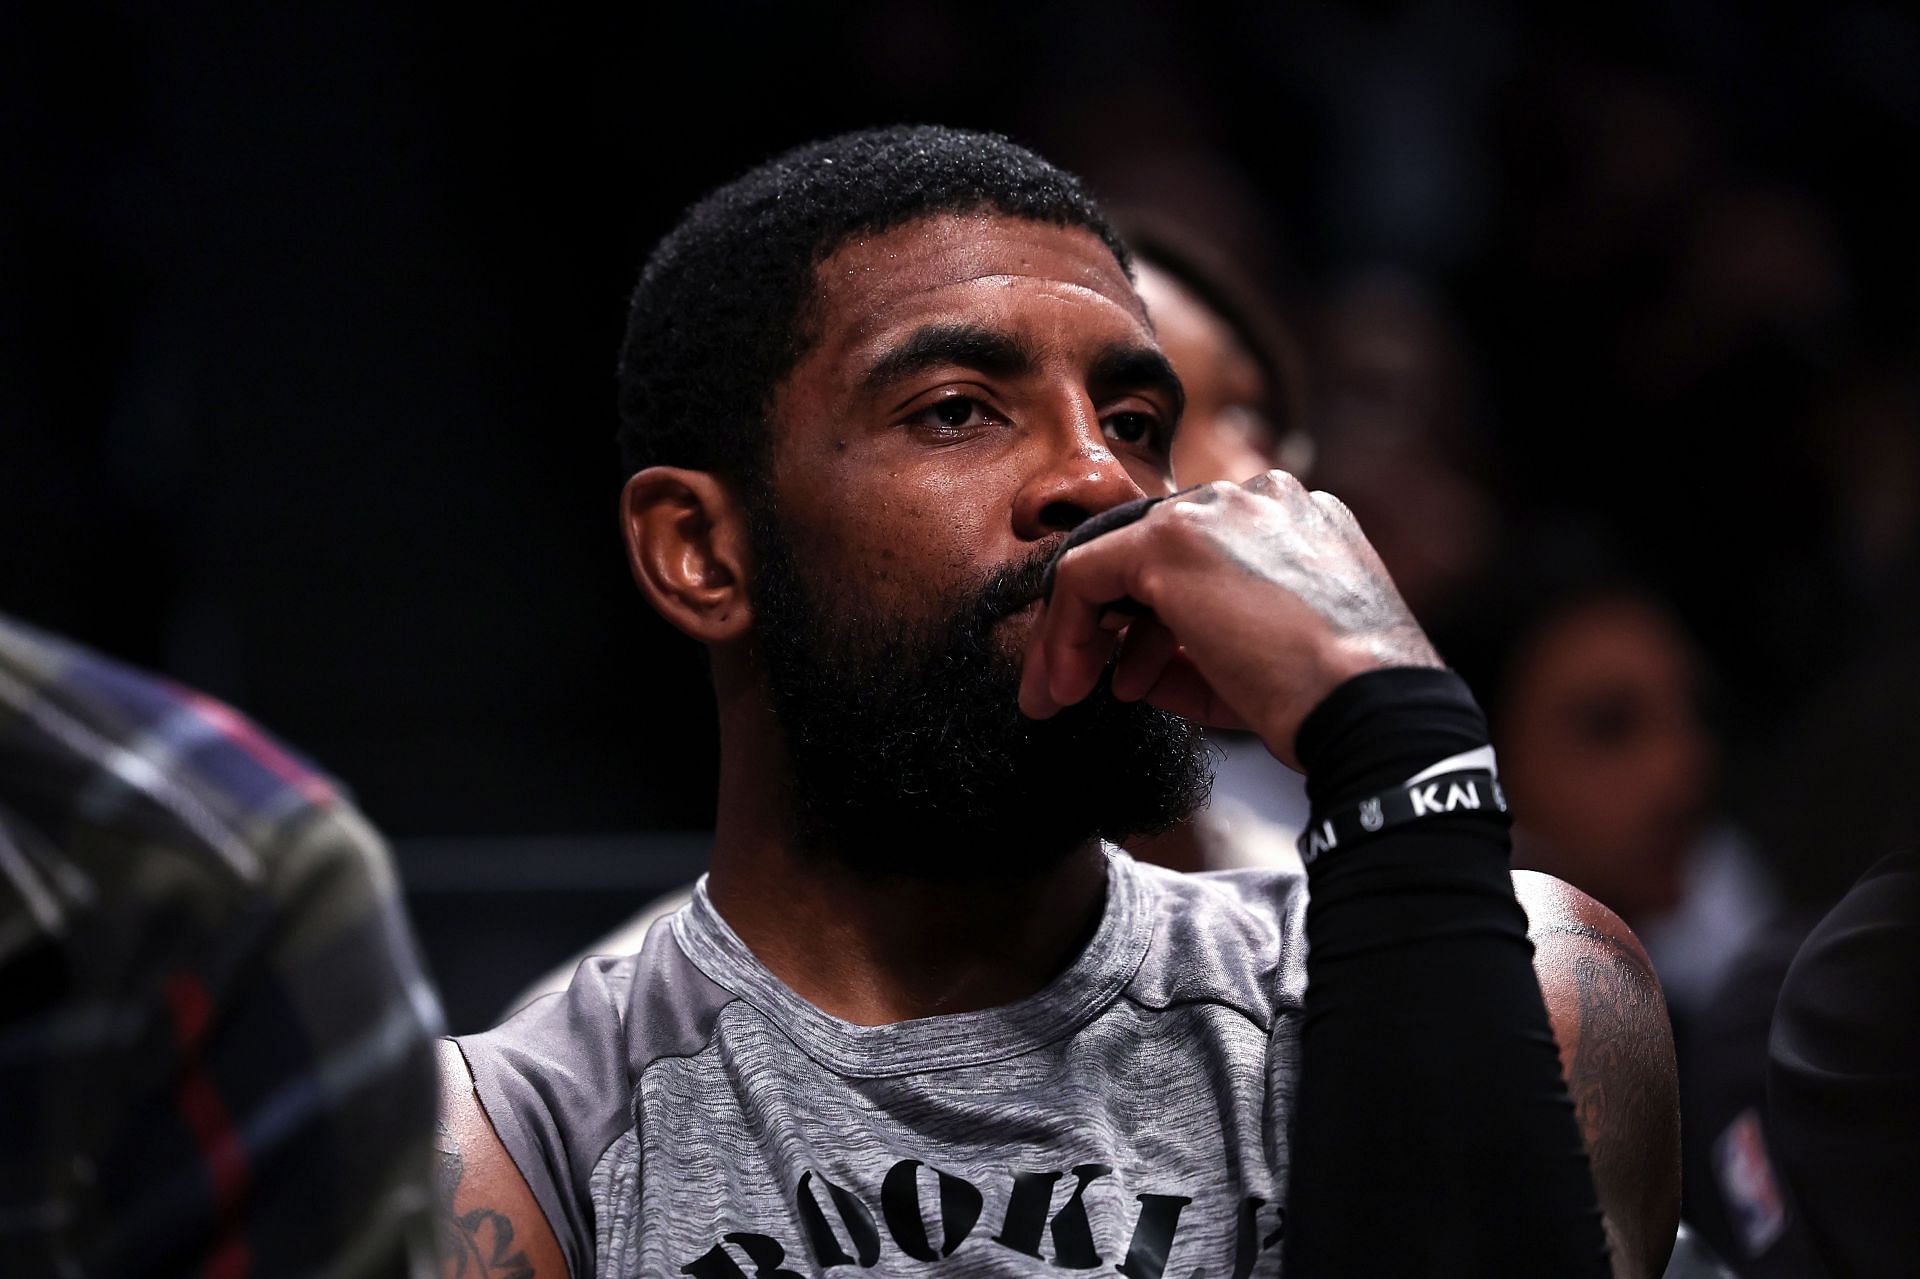 Kyrie Irving ultimately apologized for his anti-Semitic Twitter post.